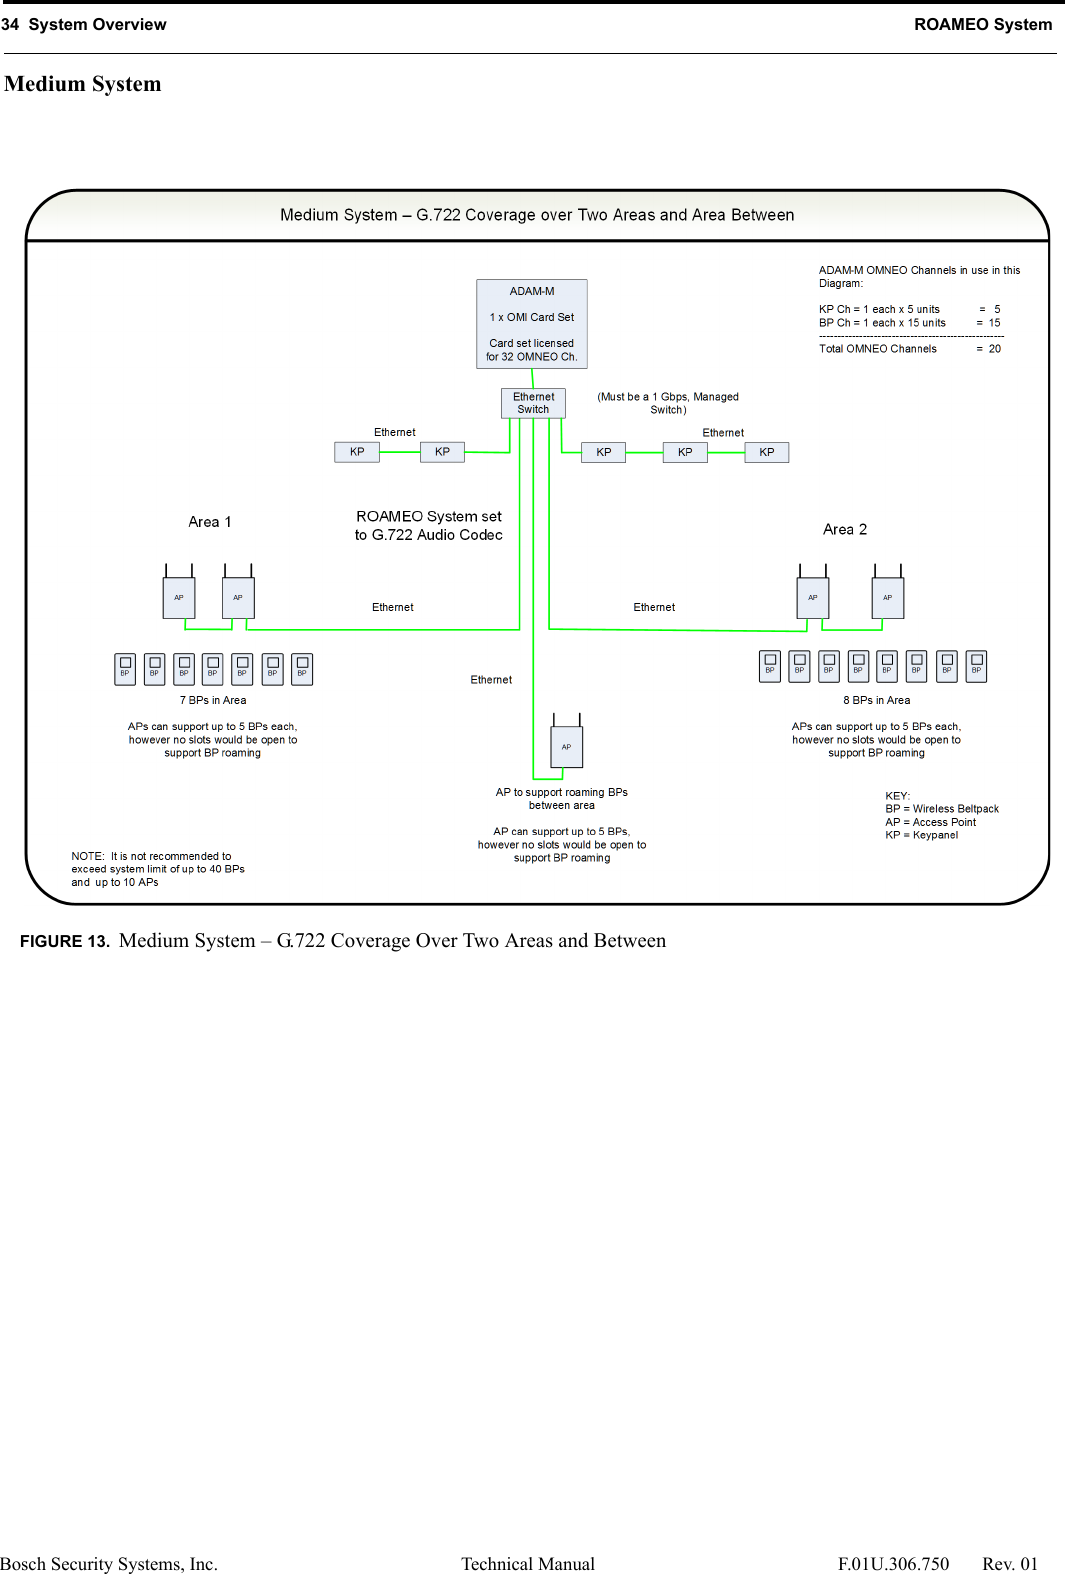 34  System Overview ROAMEO SystemBosch Security Systems, Inc. Technical Manual  F.01U.306.750 Rev. 01Medium SystemFIGURE 13. Medium System – G.722 Coverage Over Two Areas and Between